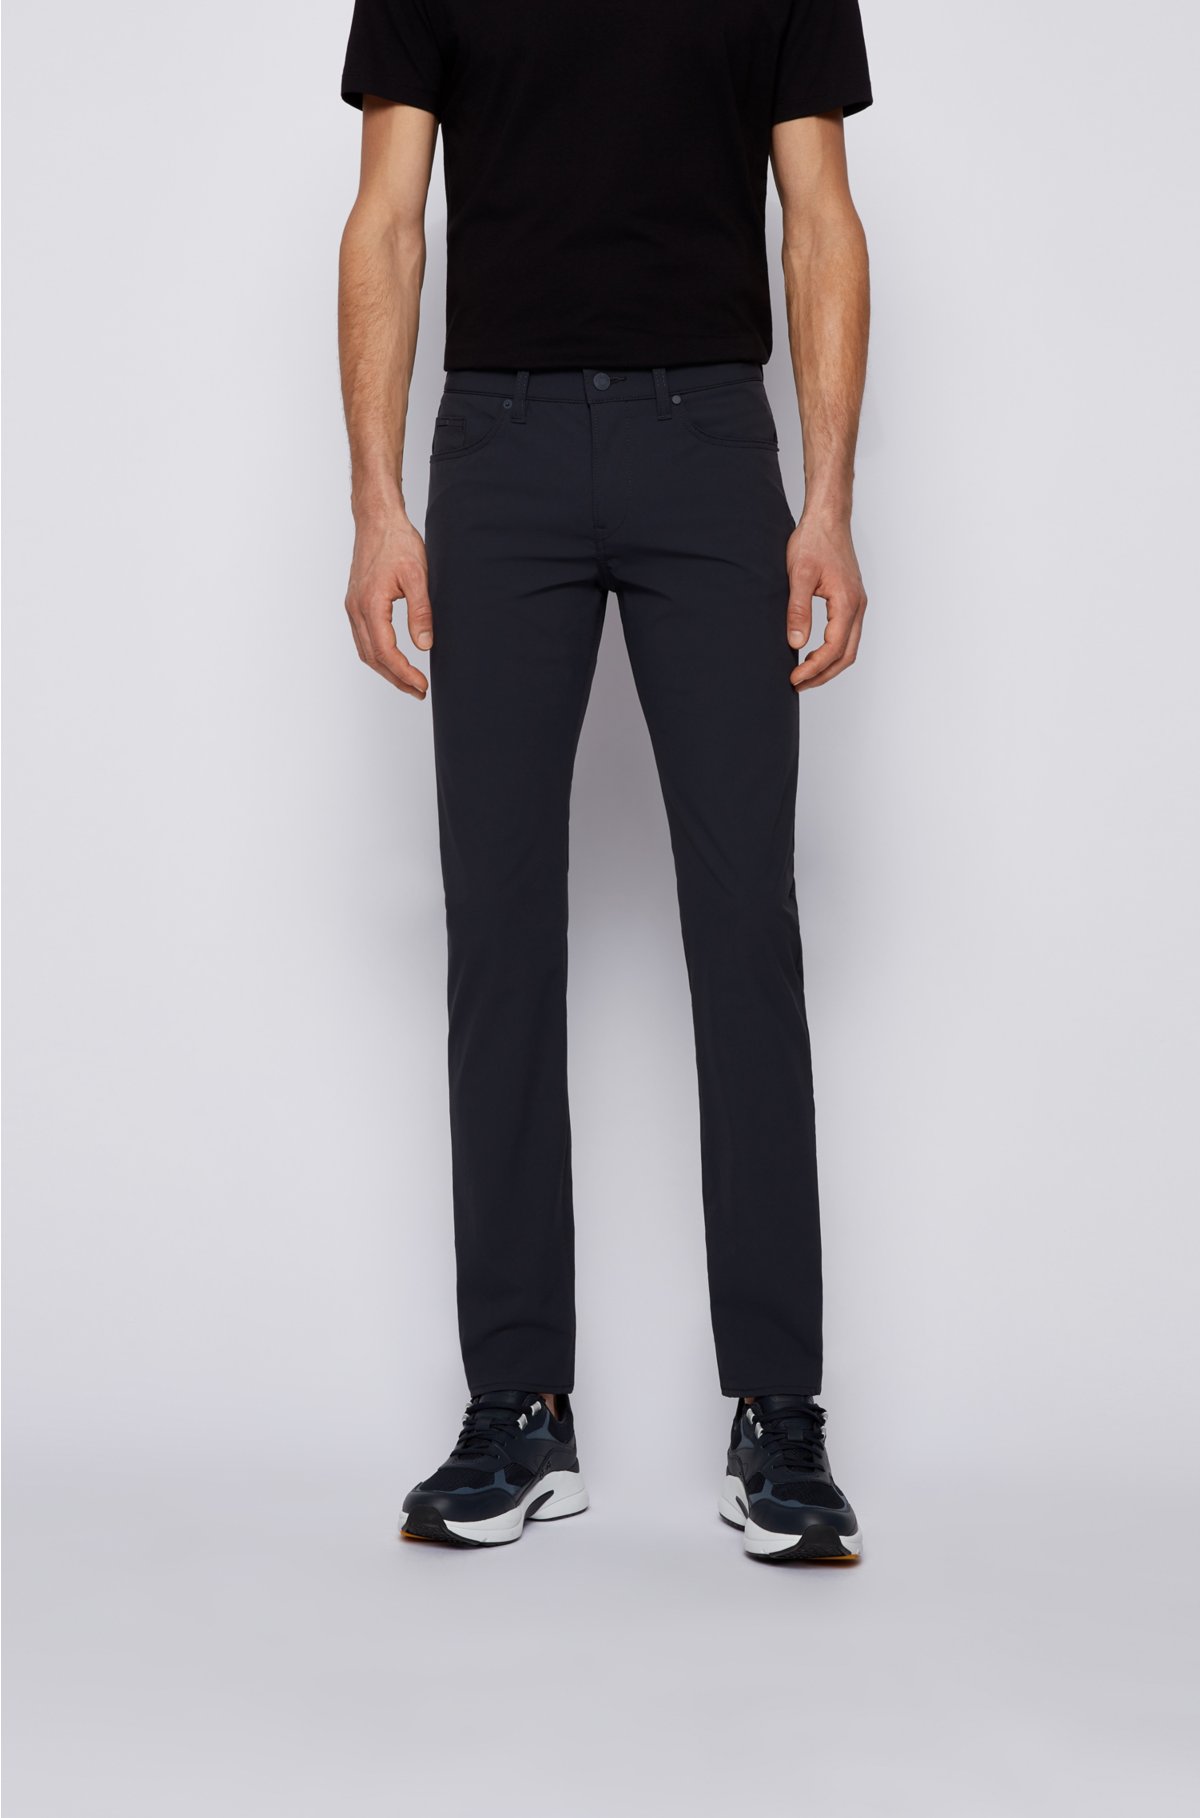 BOSS - Slim-fit jeans in water-repellent super-stretch fabric